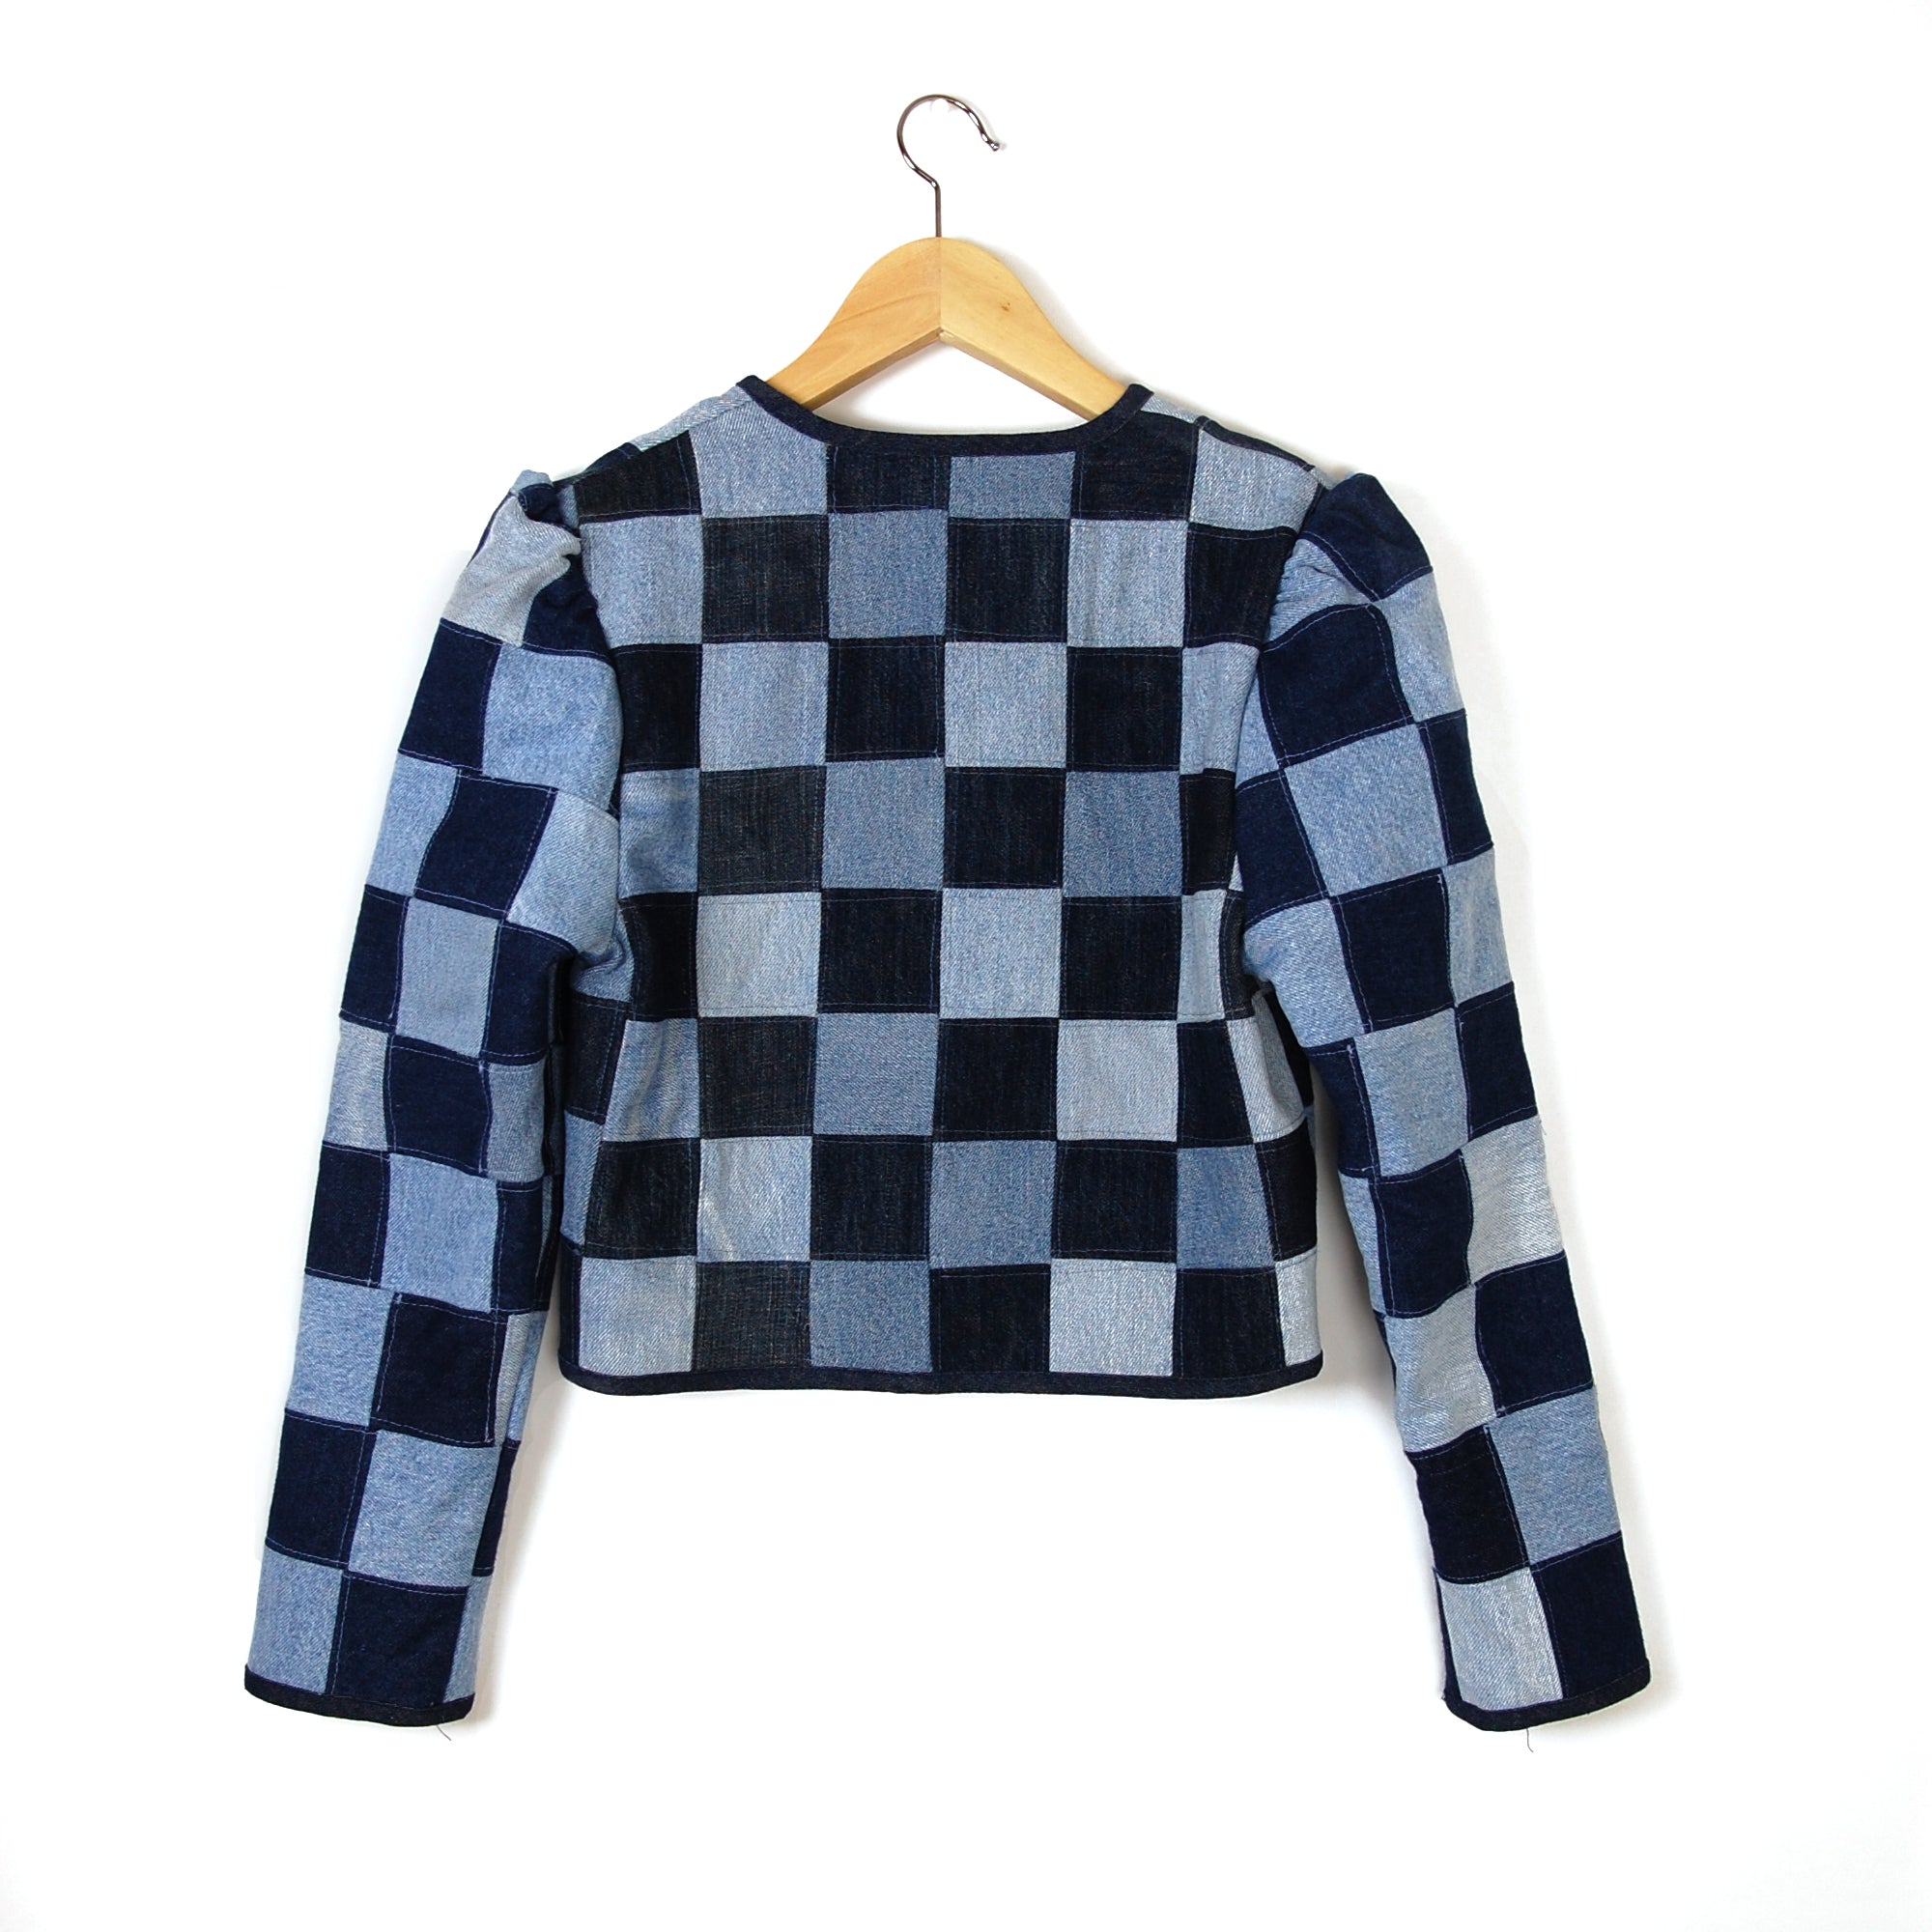 LITTLE CHECK ENERGY 2 PATCHWORK JACKET - Late to the Party